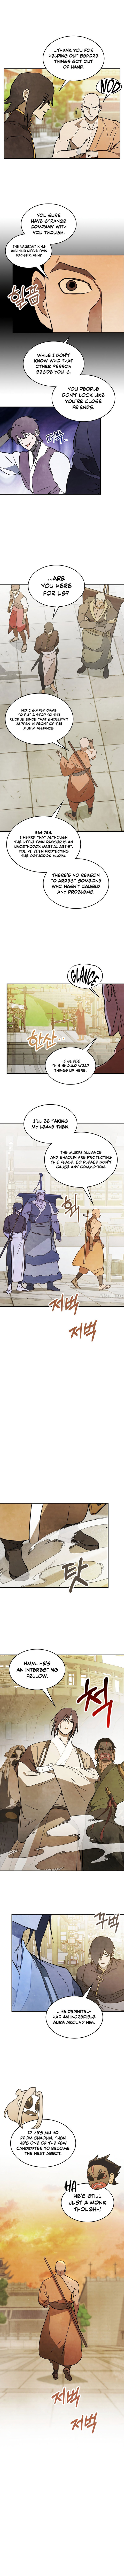 chronicles-of-the-martial-gods-return-chap-82-2